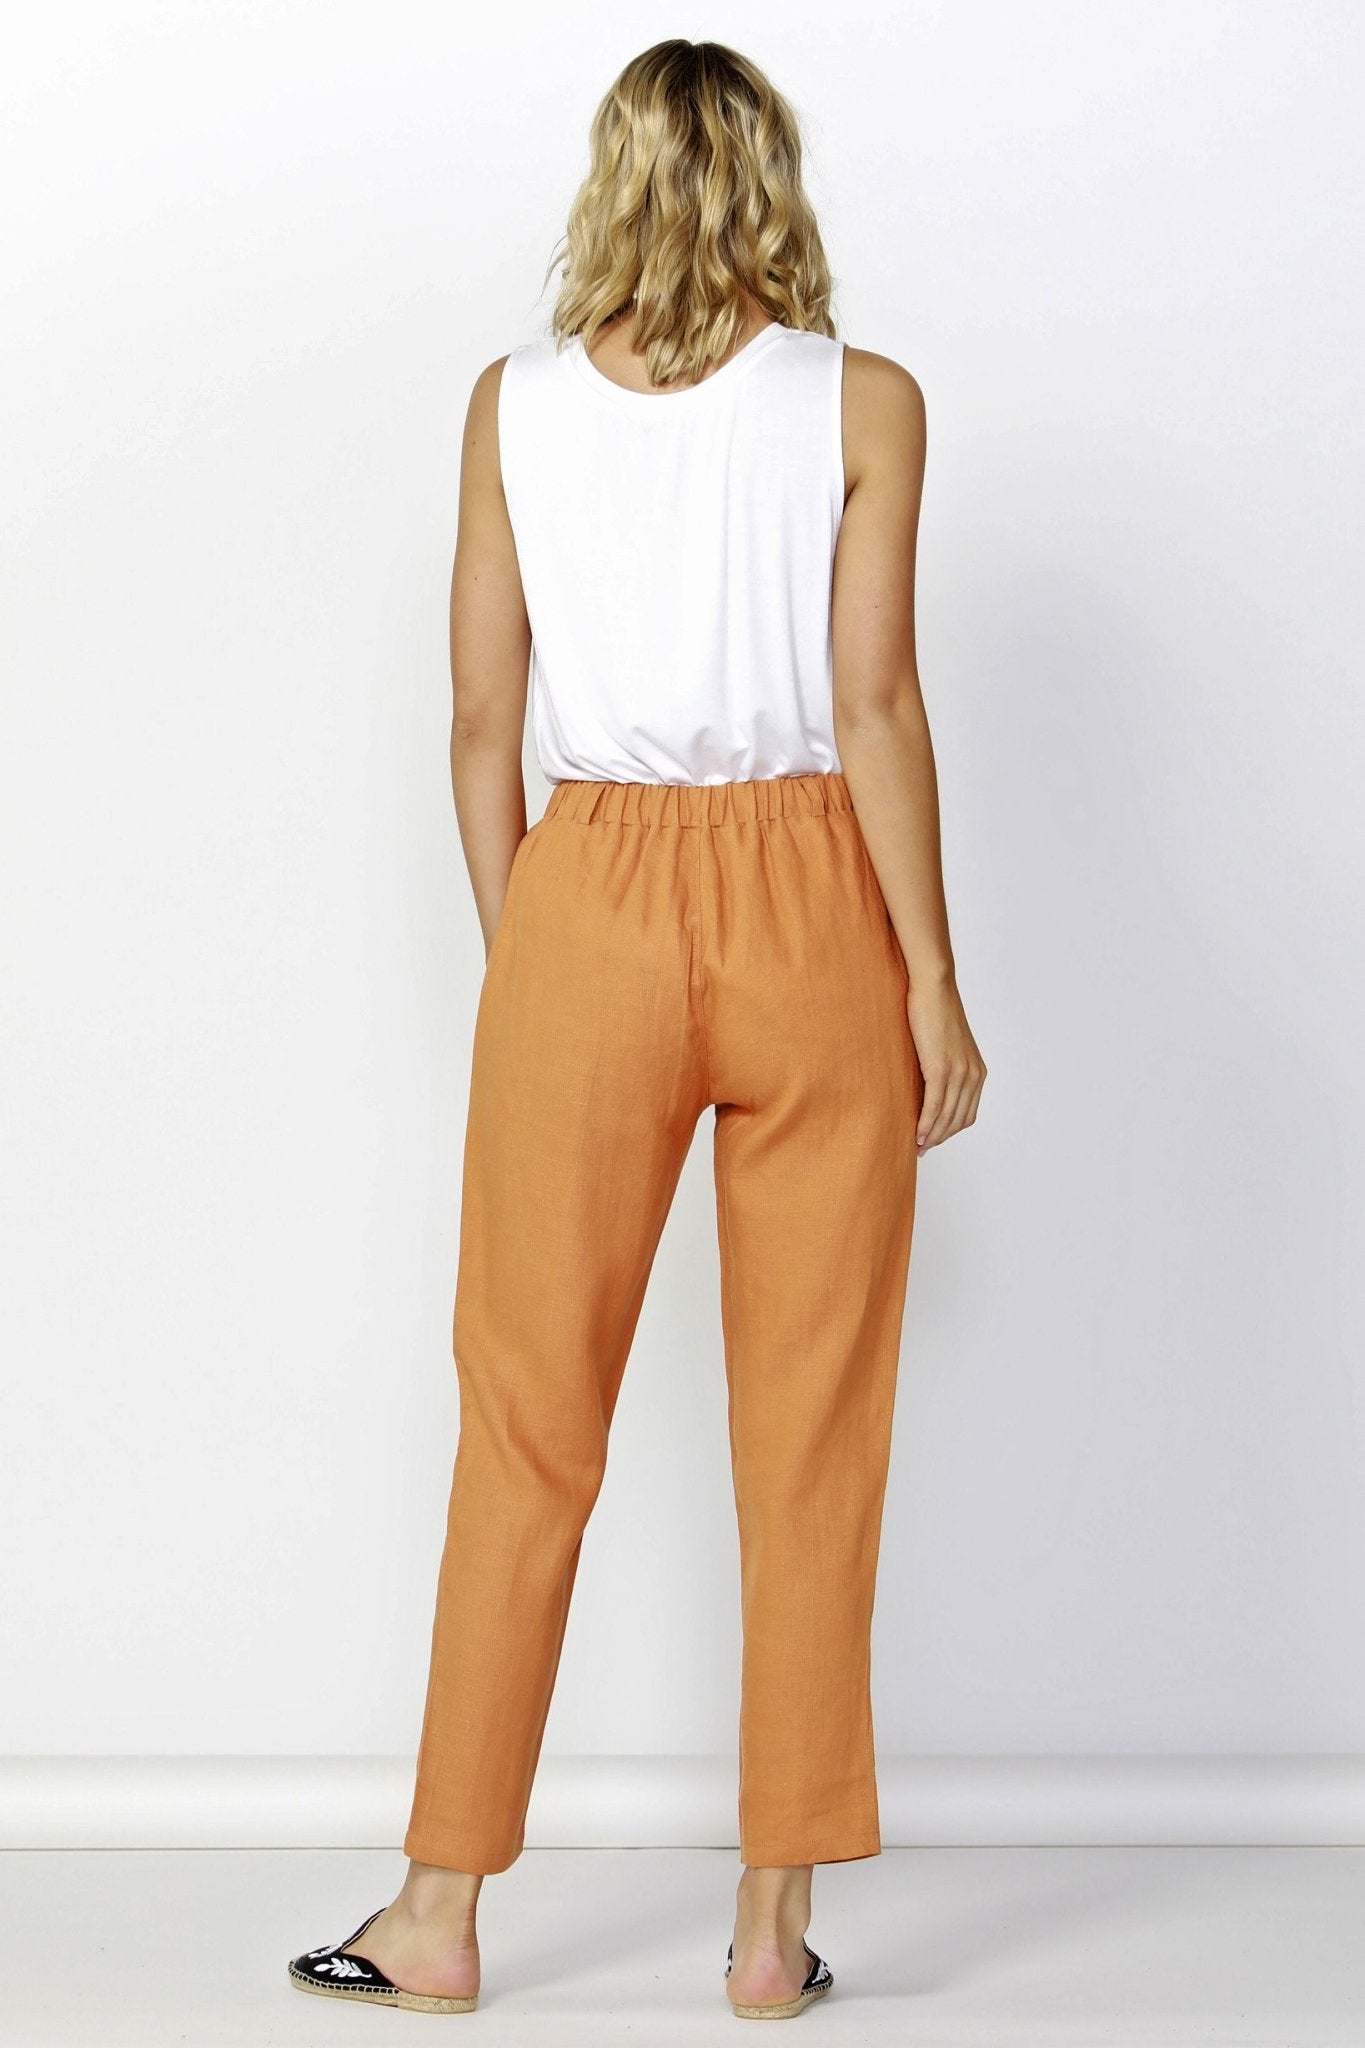 Betty Basics Rocco Linen Pant in Rust Size 8 or 14 Only - Hey Sara